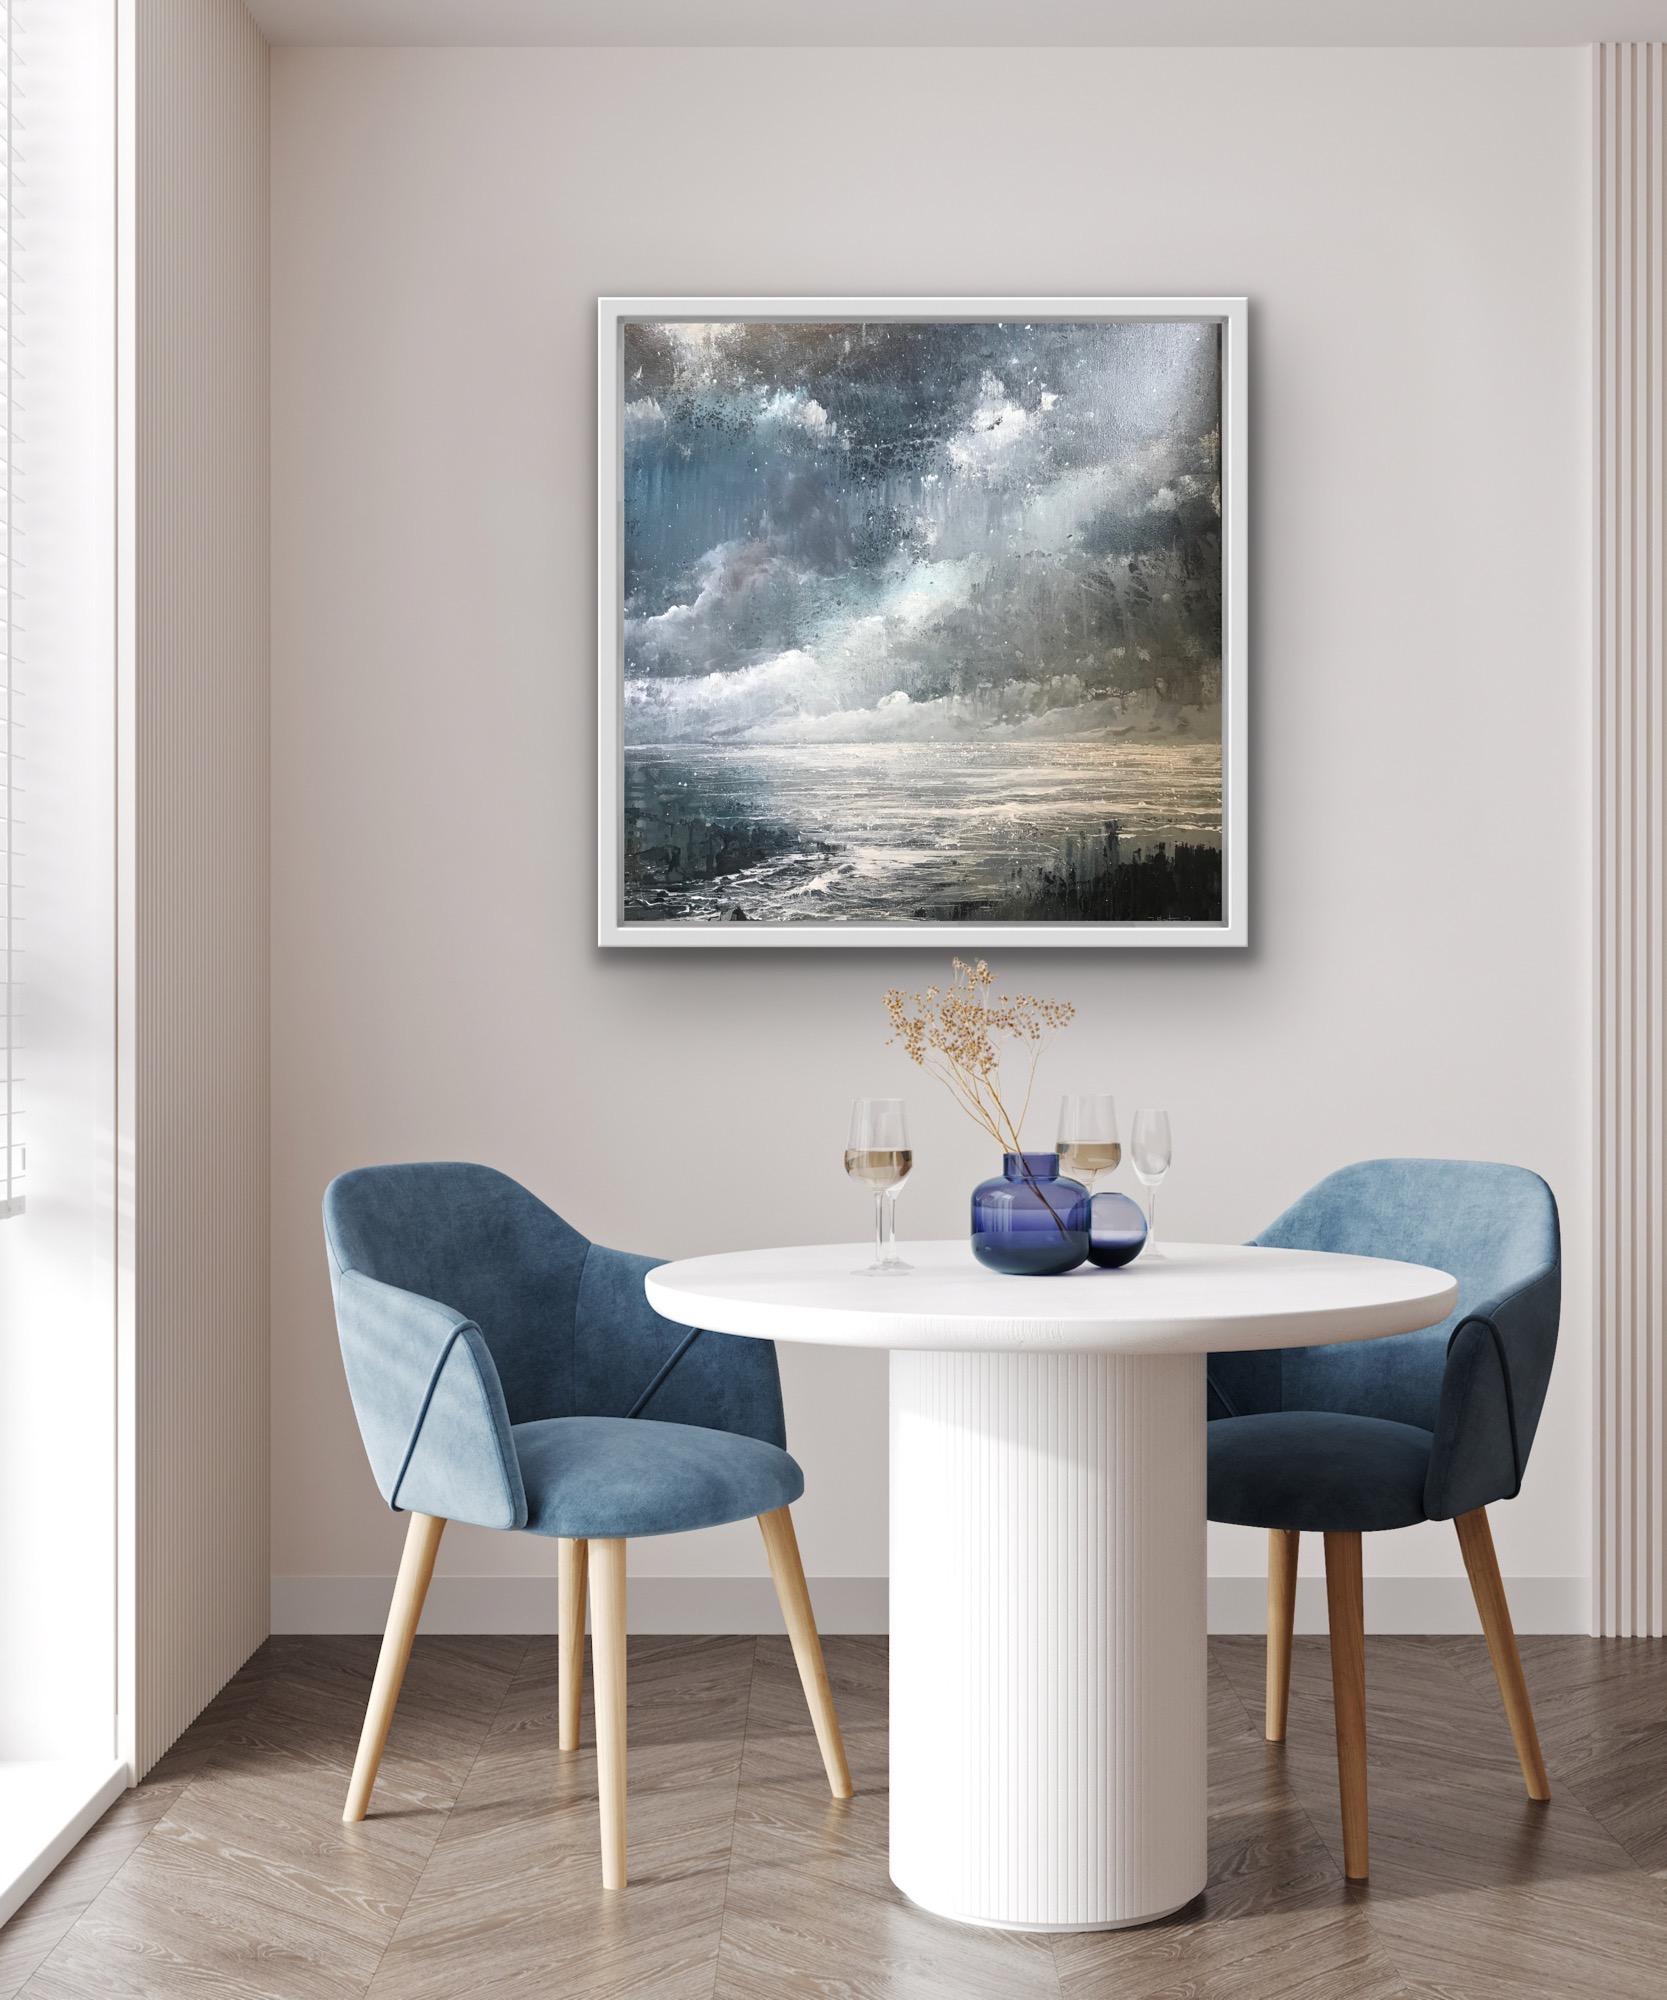 Darkness at the Coast contemporary seascape painting with grey , blue and white - Painting by James Bonstow